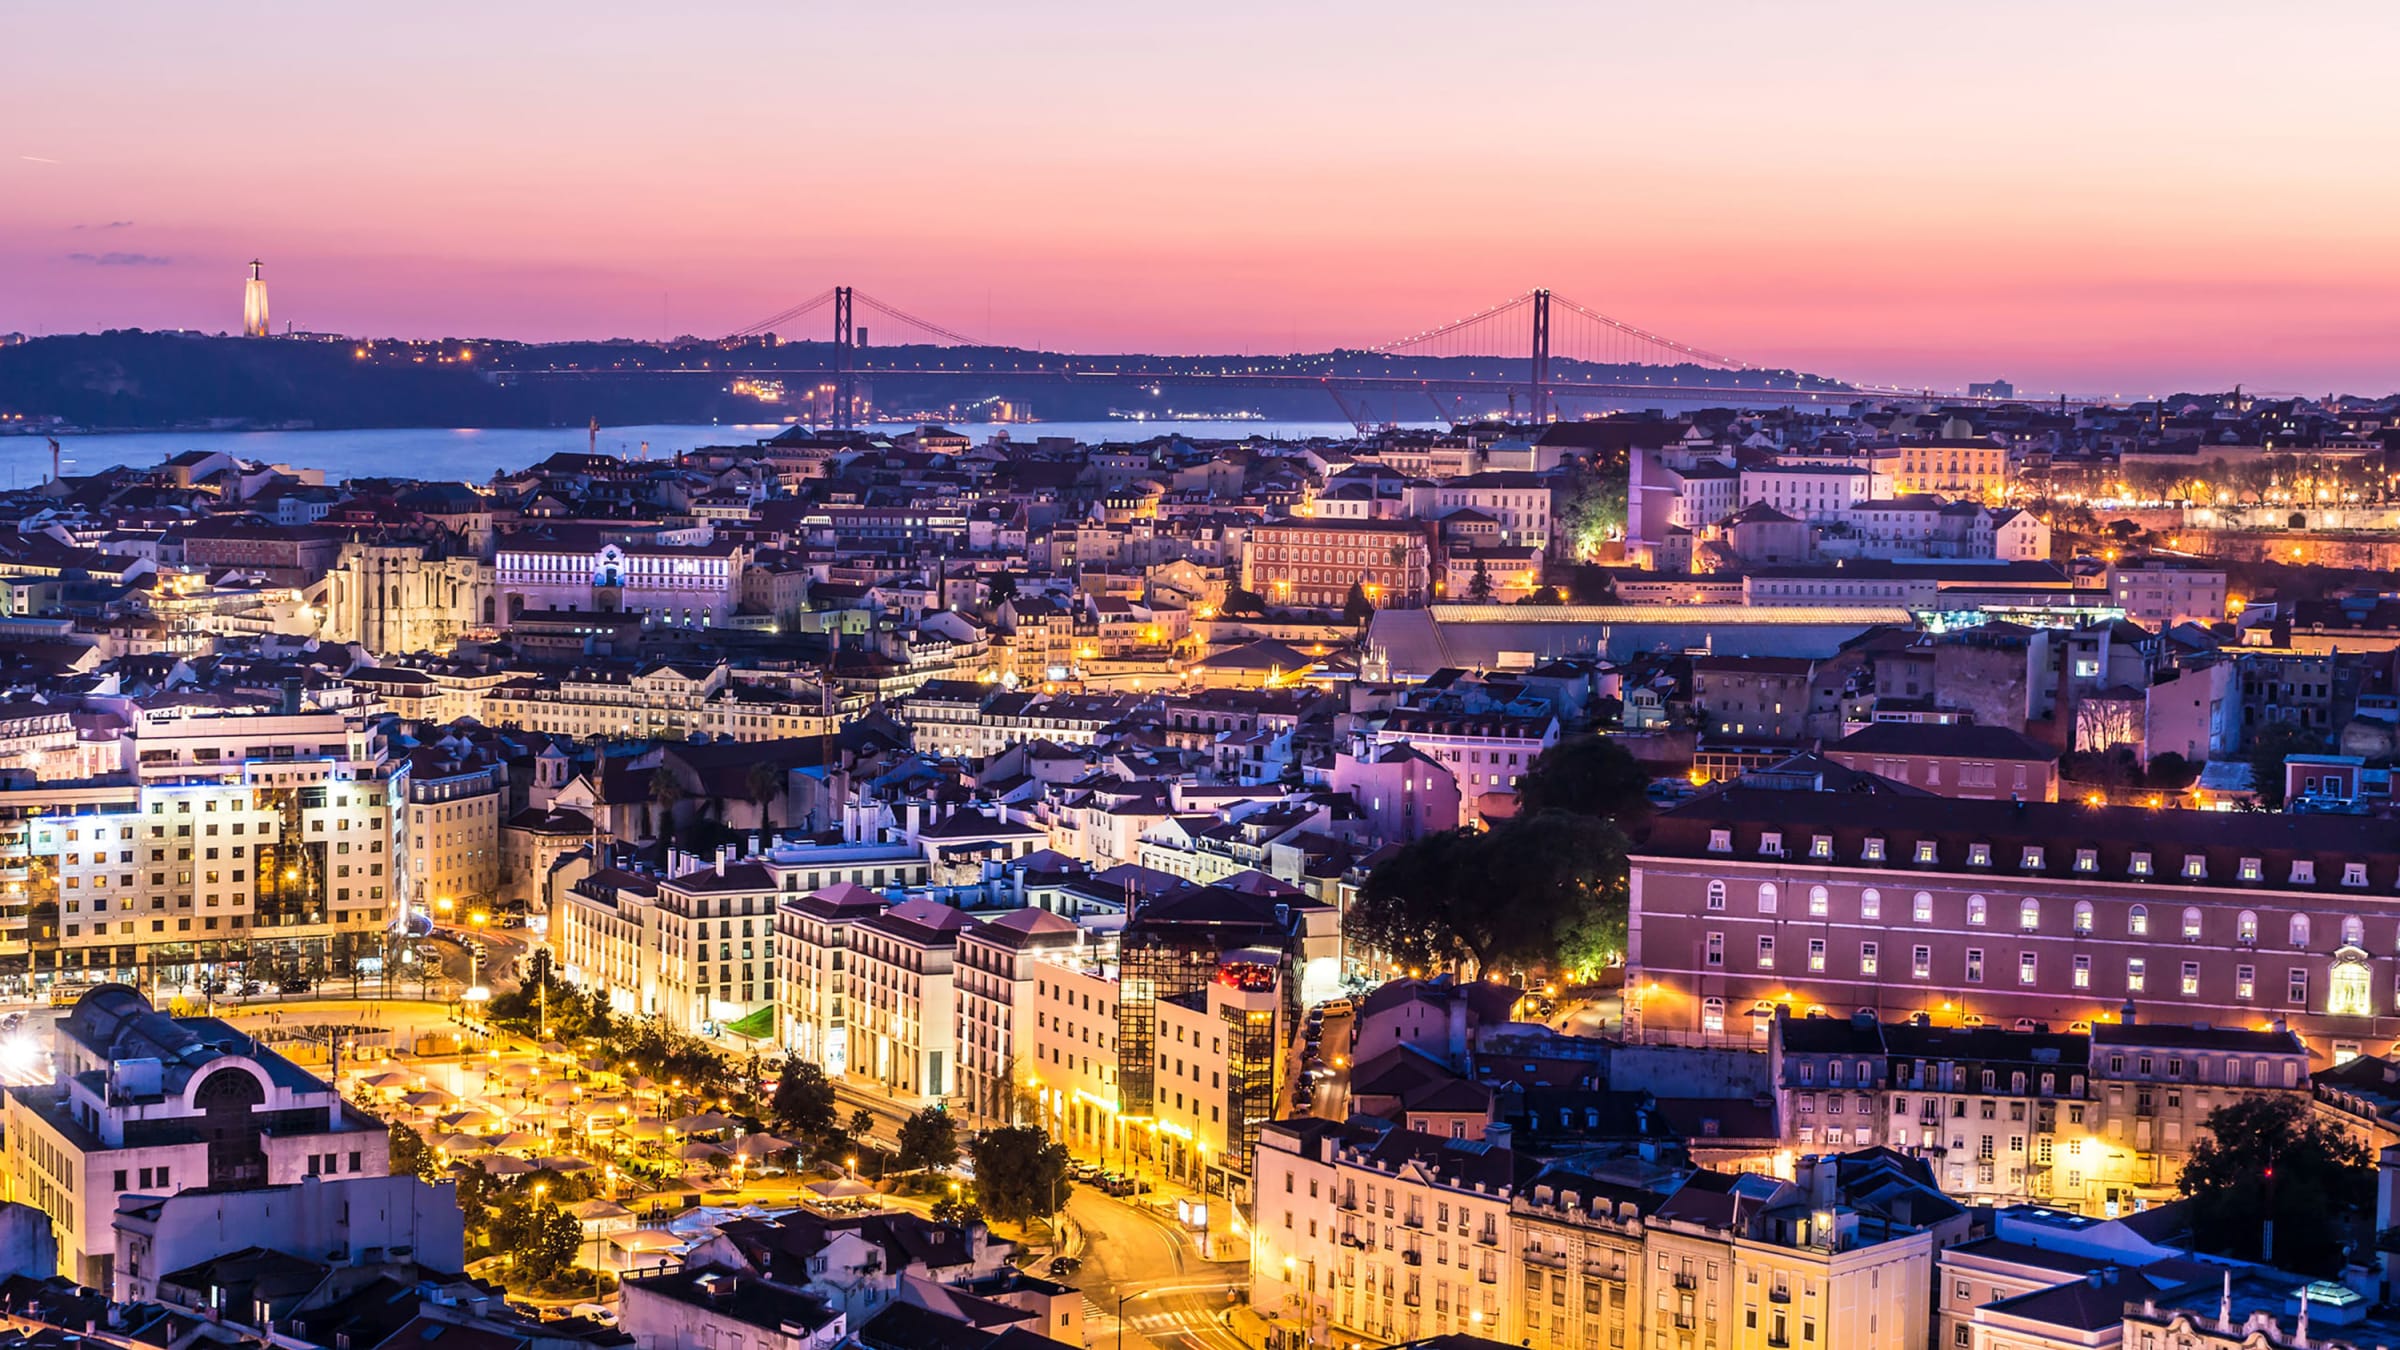 How Lisbon Went from Backwater to Drowning in Riches